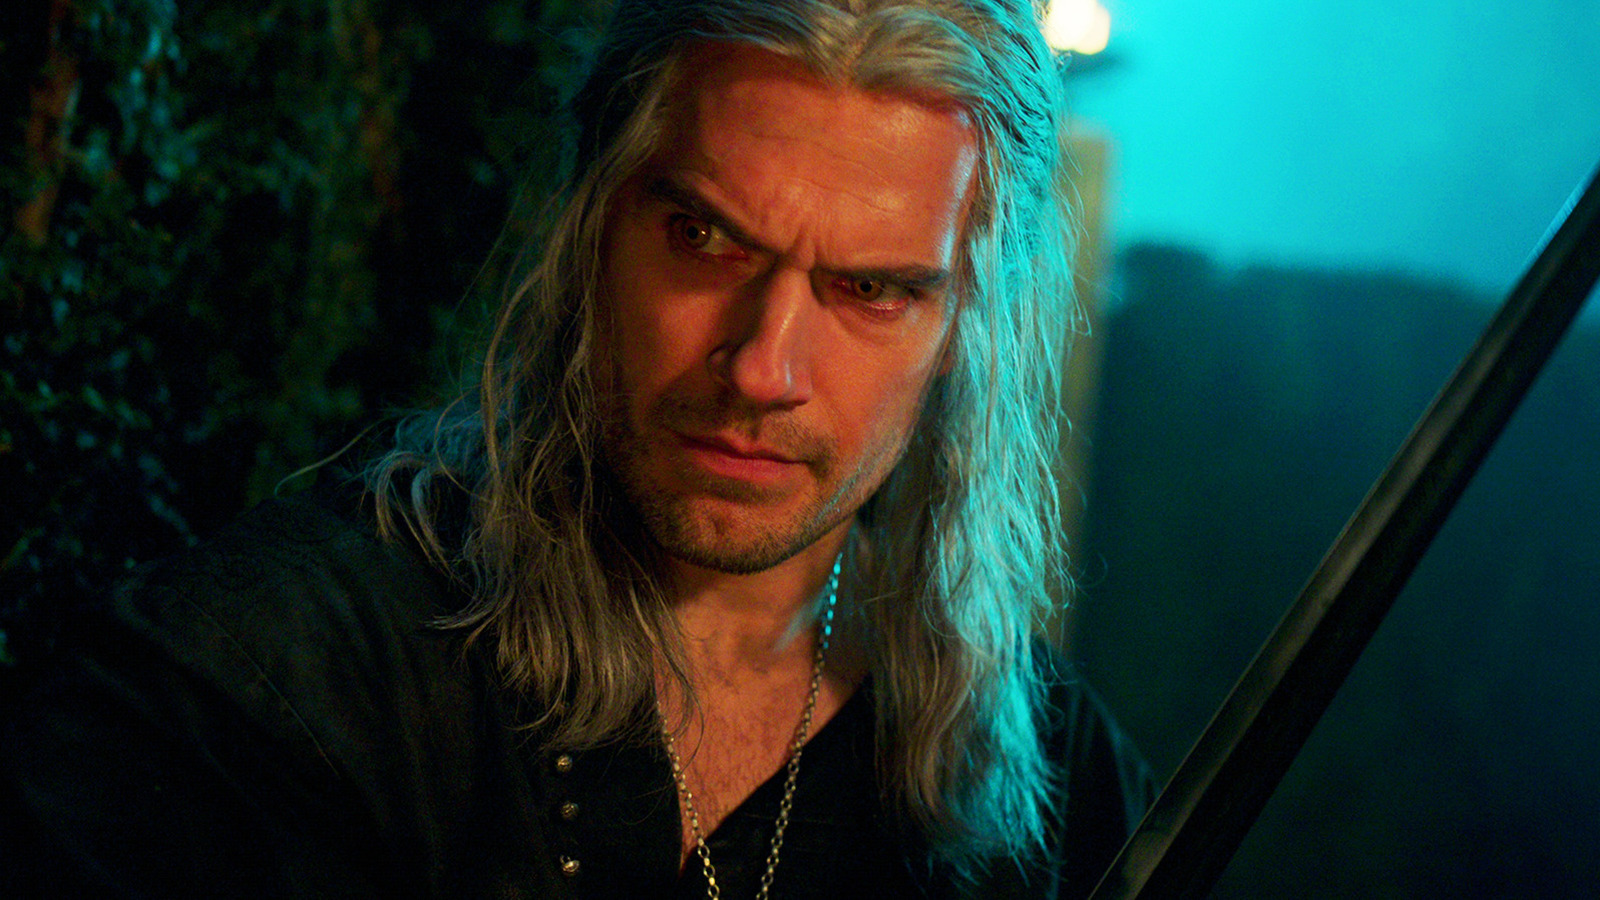 One Season 3 Monster In The Witcher Deeply Disturbed Some Of The Cast Off-Screen